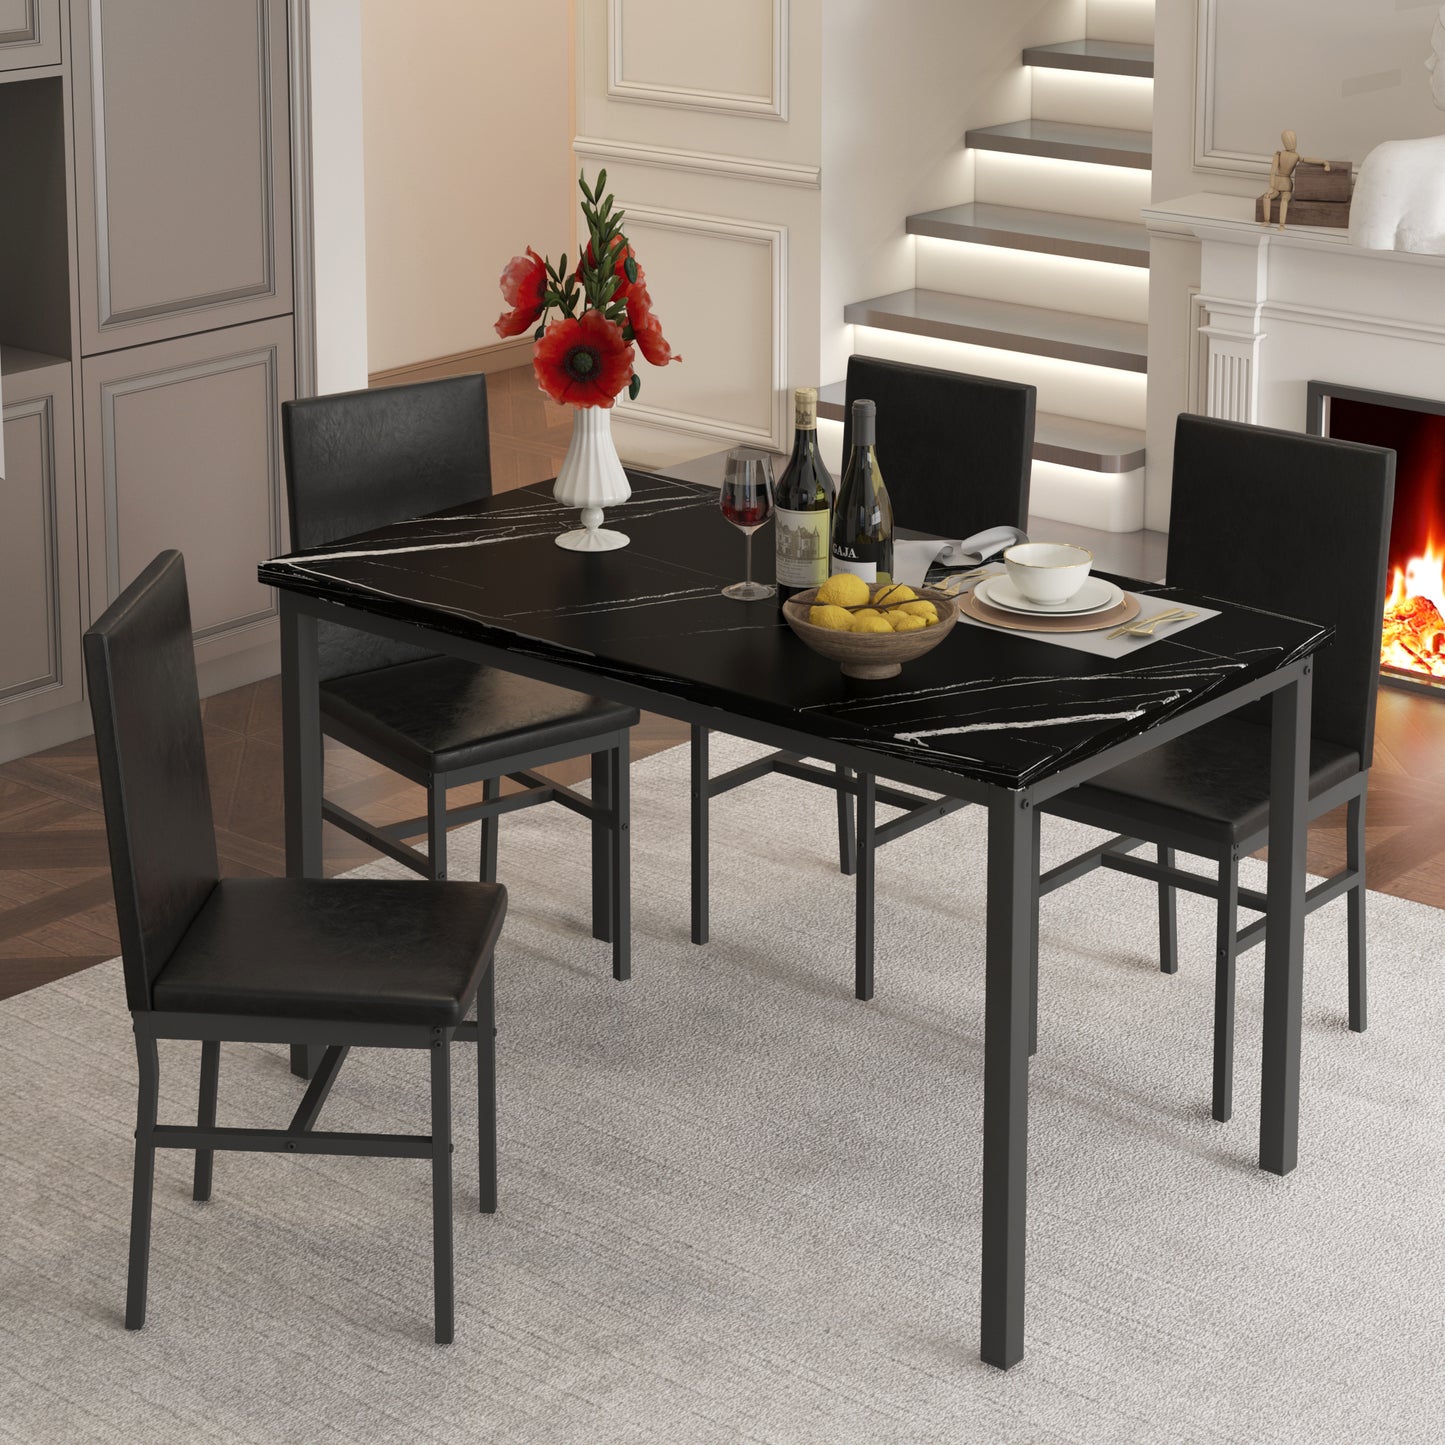 5 Piece Dining Set, Modern Dining Table and Chairs Set for 4, Kitchen Dining Table Set with Faux Marble Tabletop and 4 PU Leather Upholstered Chairs, for Small Space, Breakfast Nook, D8913